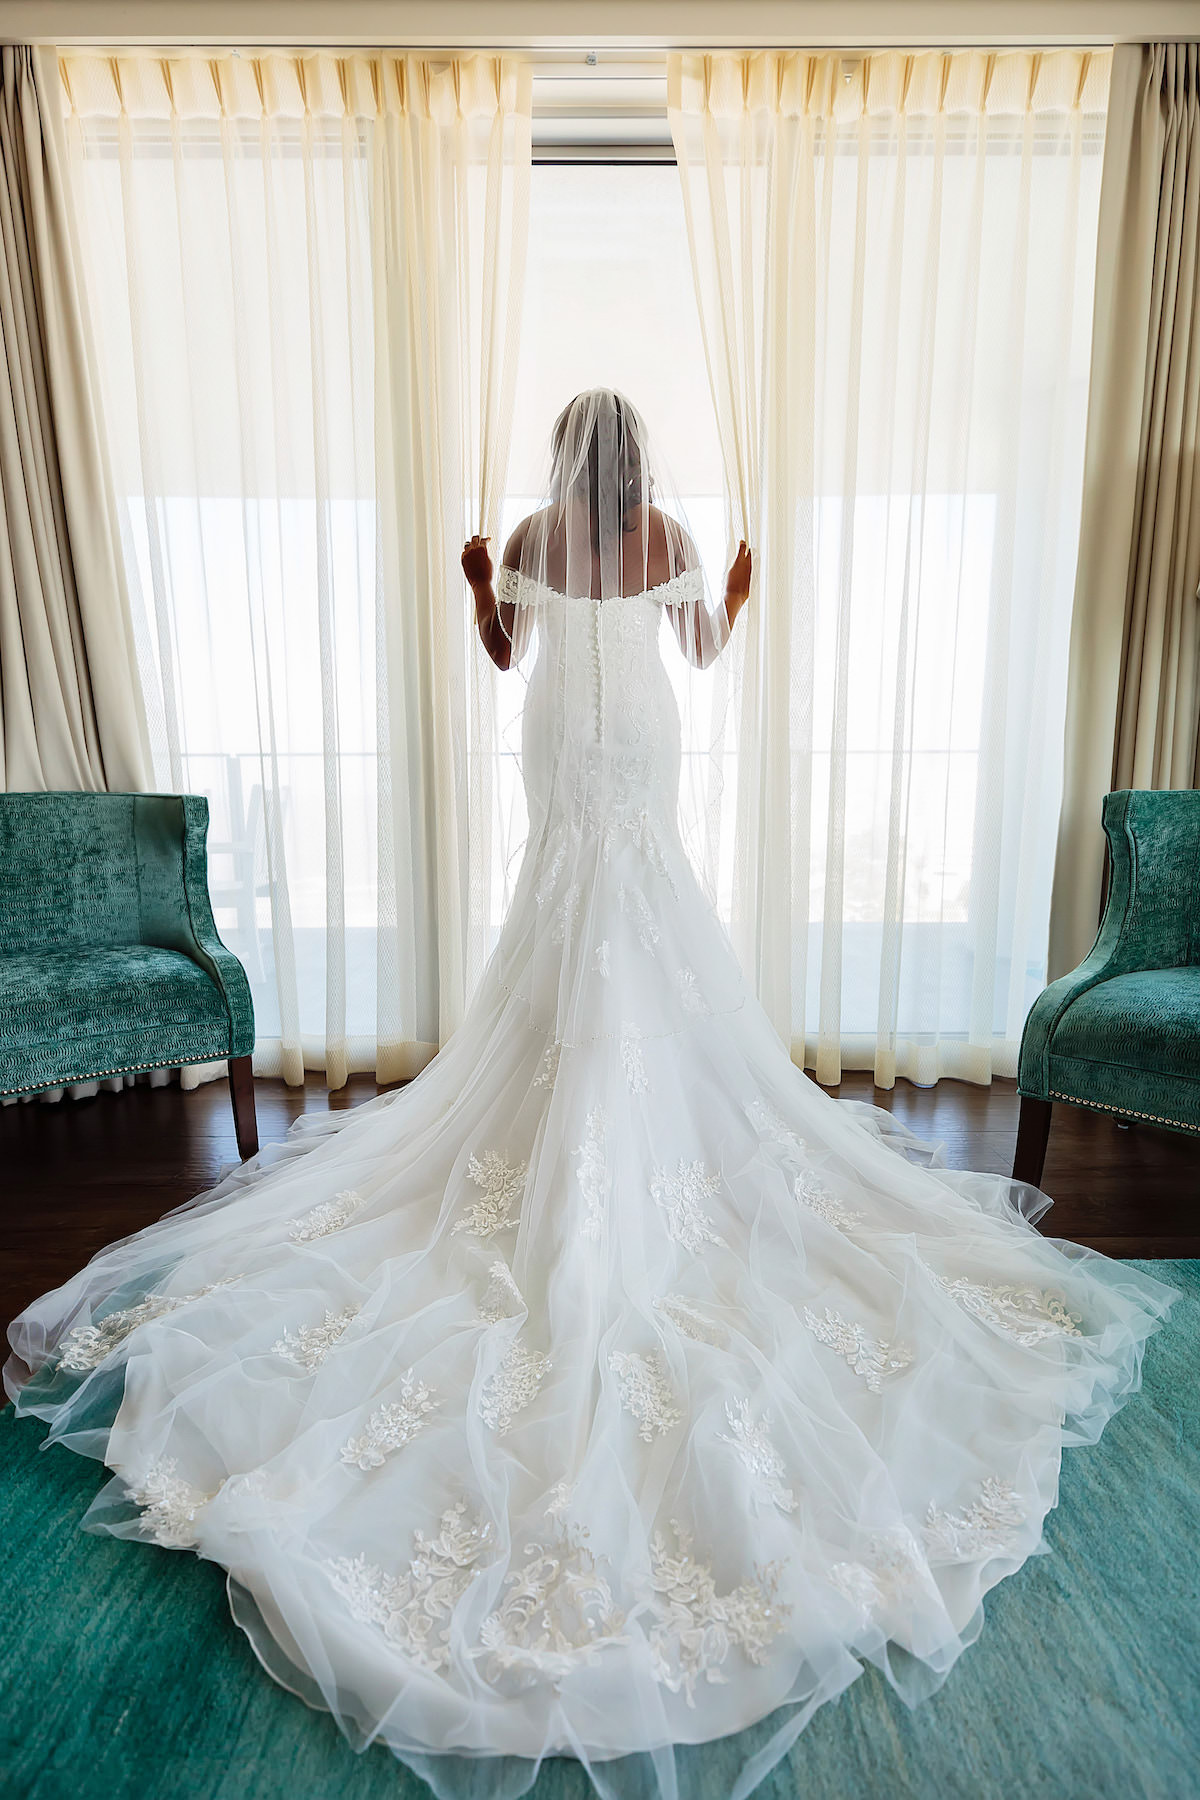 Classic Tampa Bay Bride at Window in Off the Shoulder Lace Wedding Dress